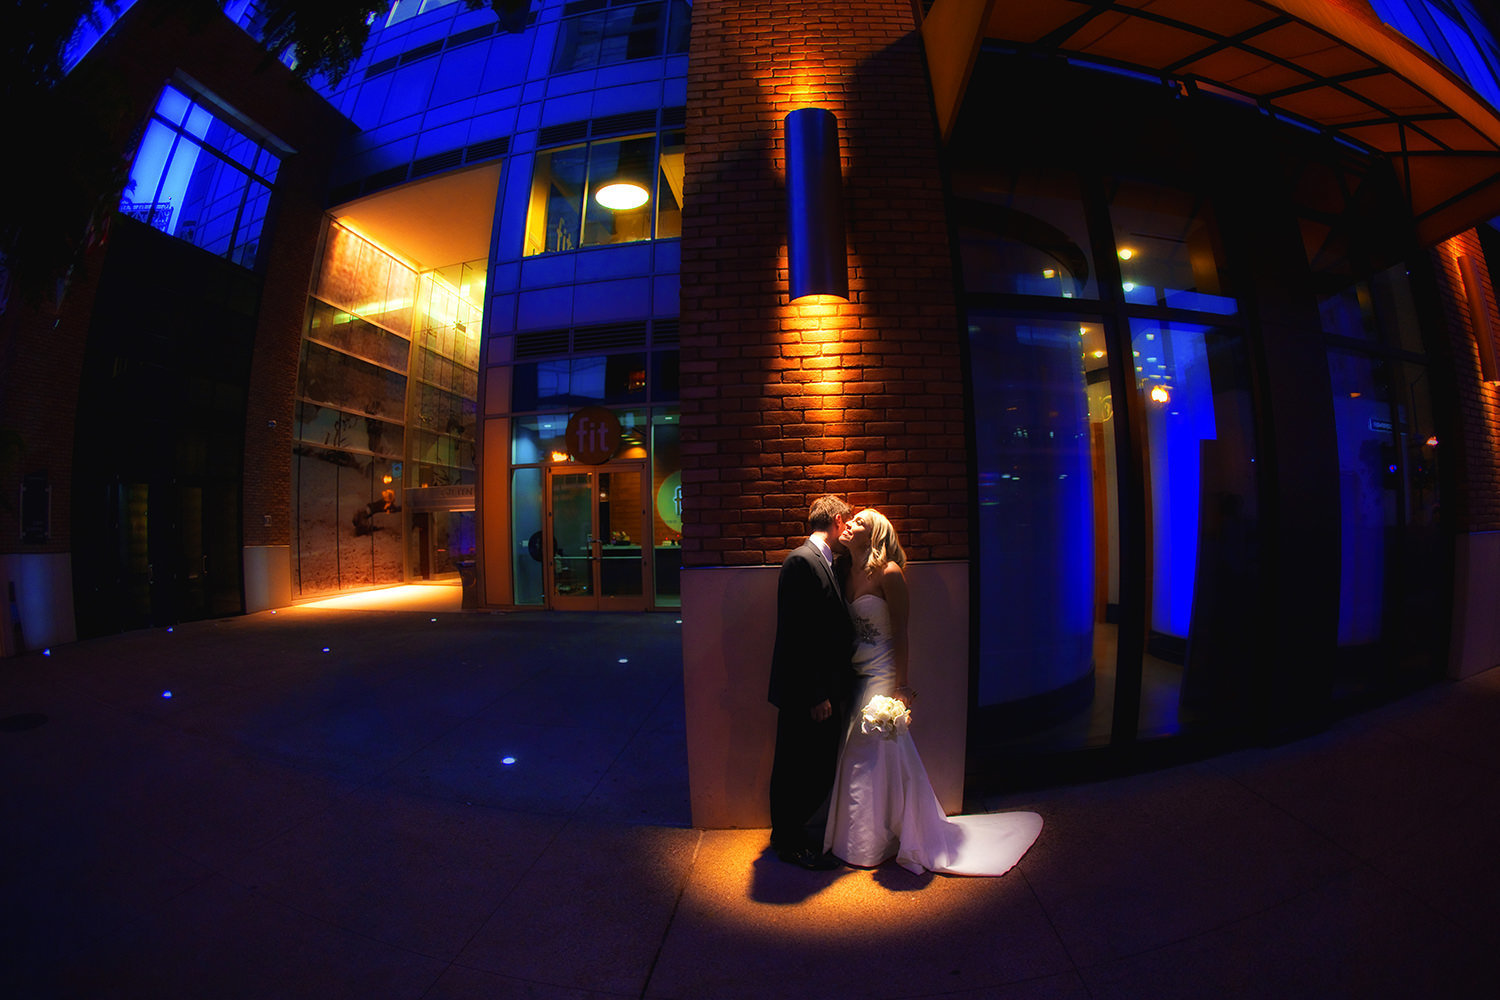 Awesome night time portrait of wedding couple downtown